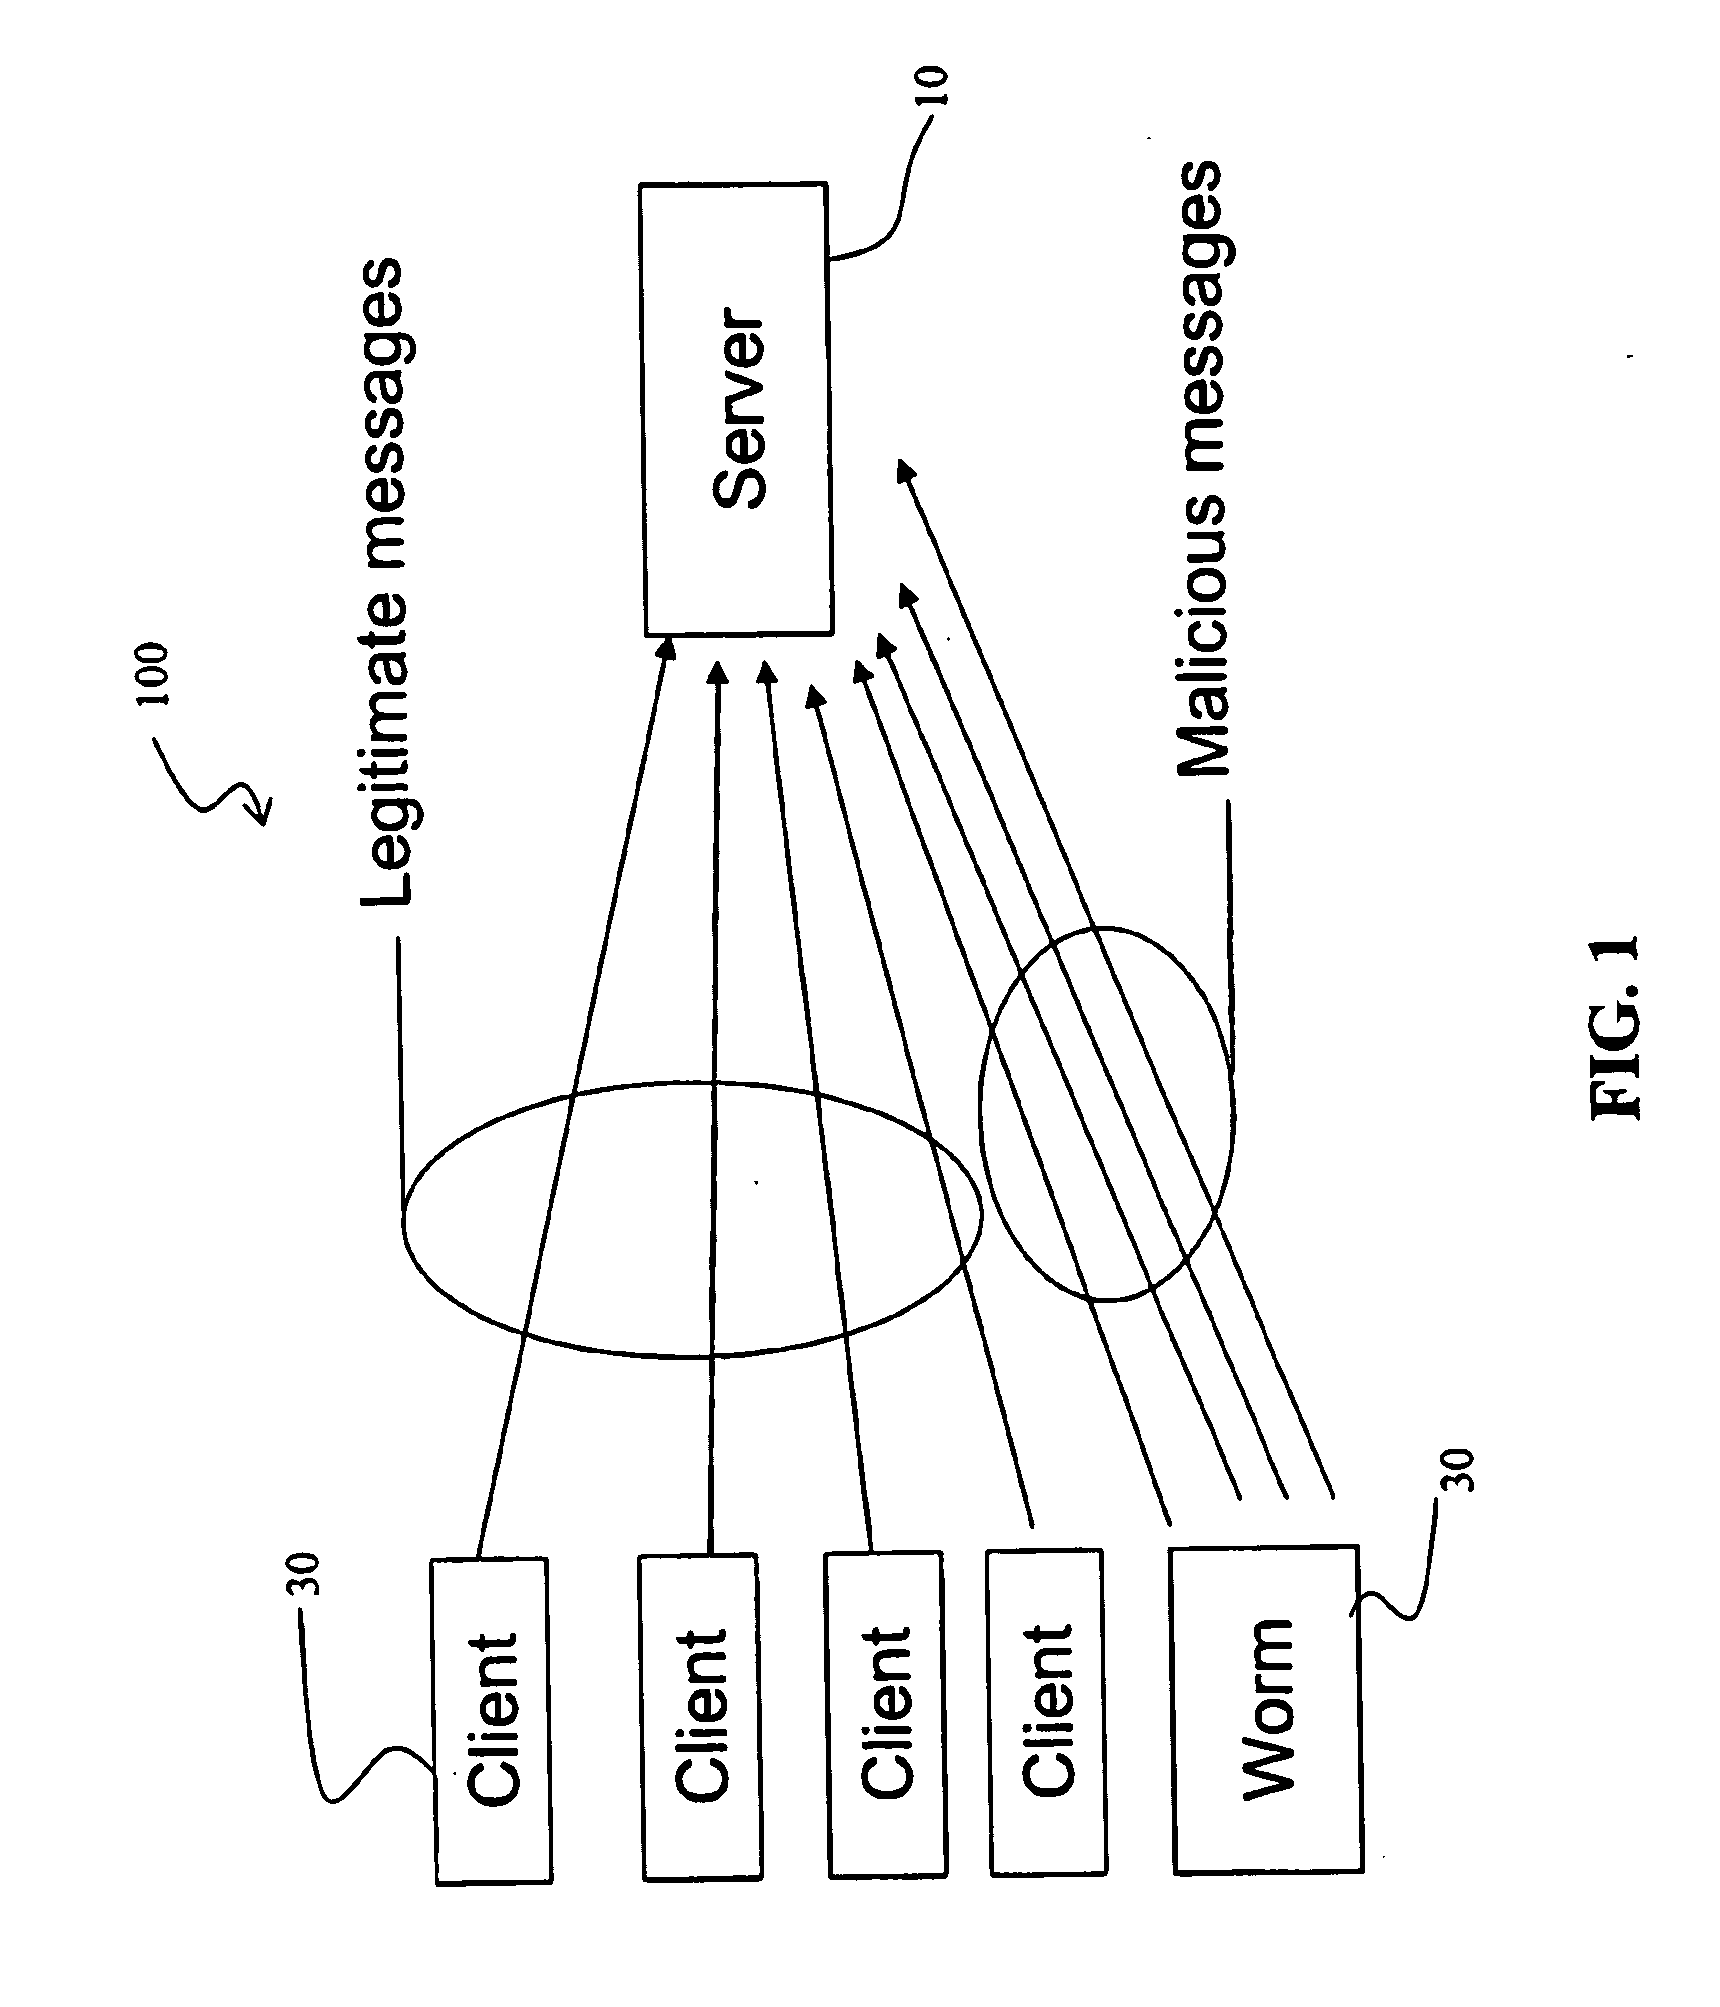 Method and appratus to control application messages between client and a server having a private network address